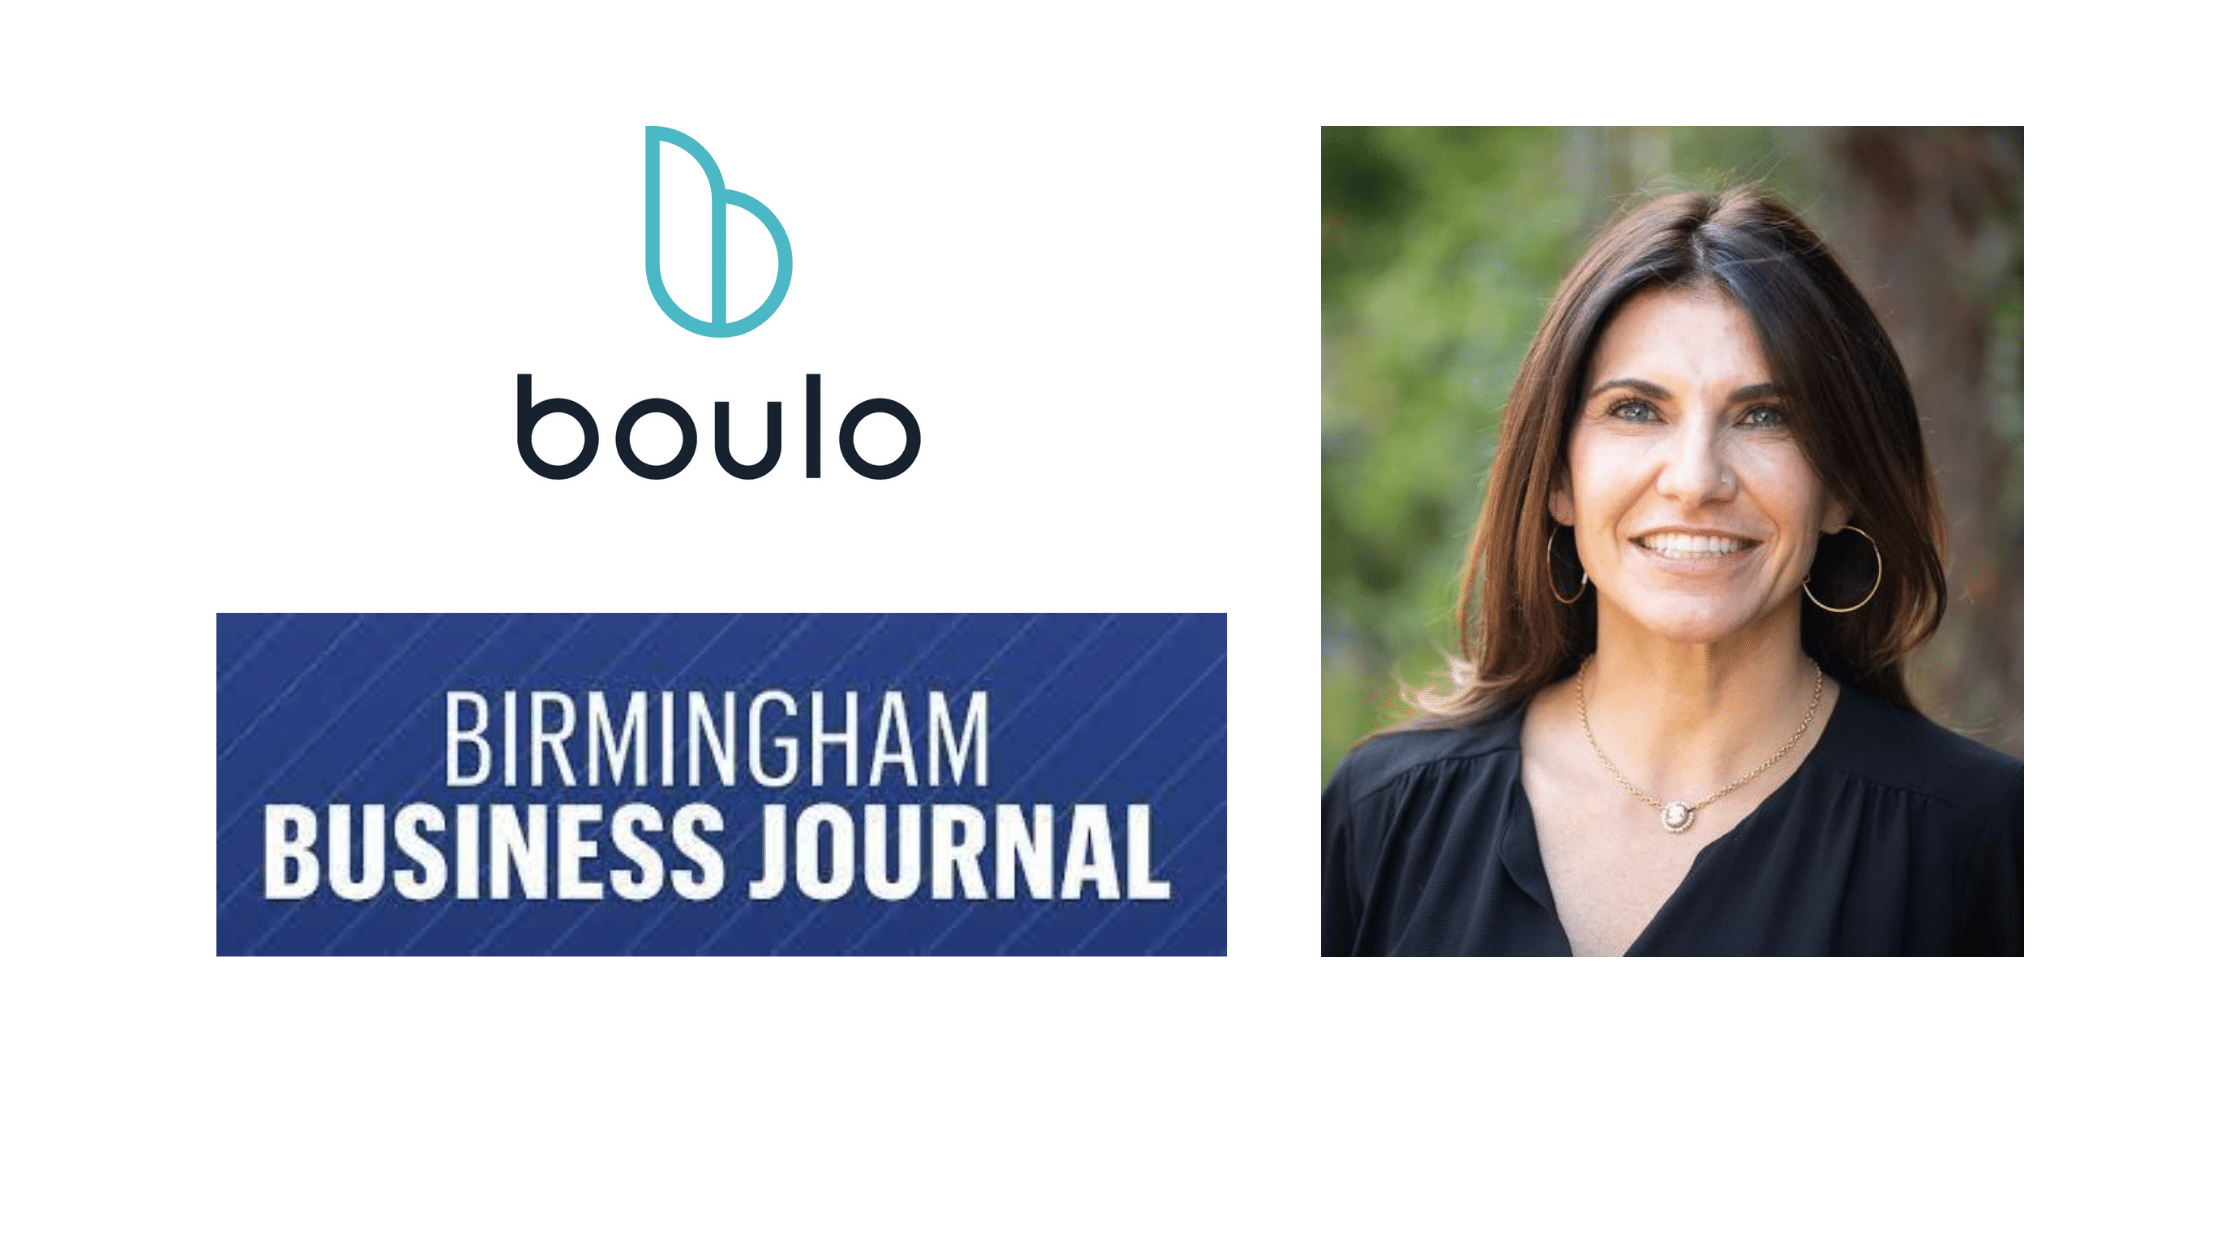 Birmingham Business Journal and Boulo Solutions logo, and Delphine Carter photo for BBJ story on Boulo